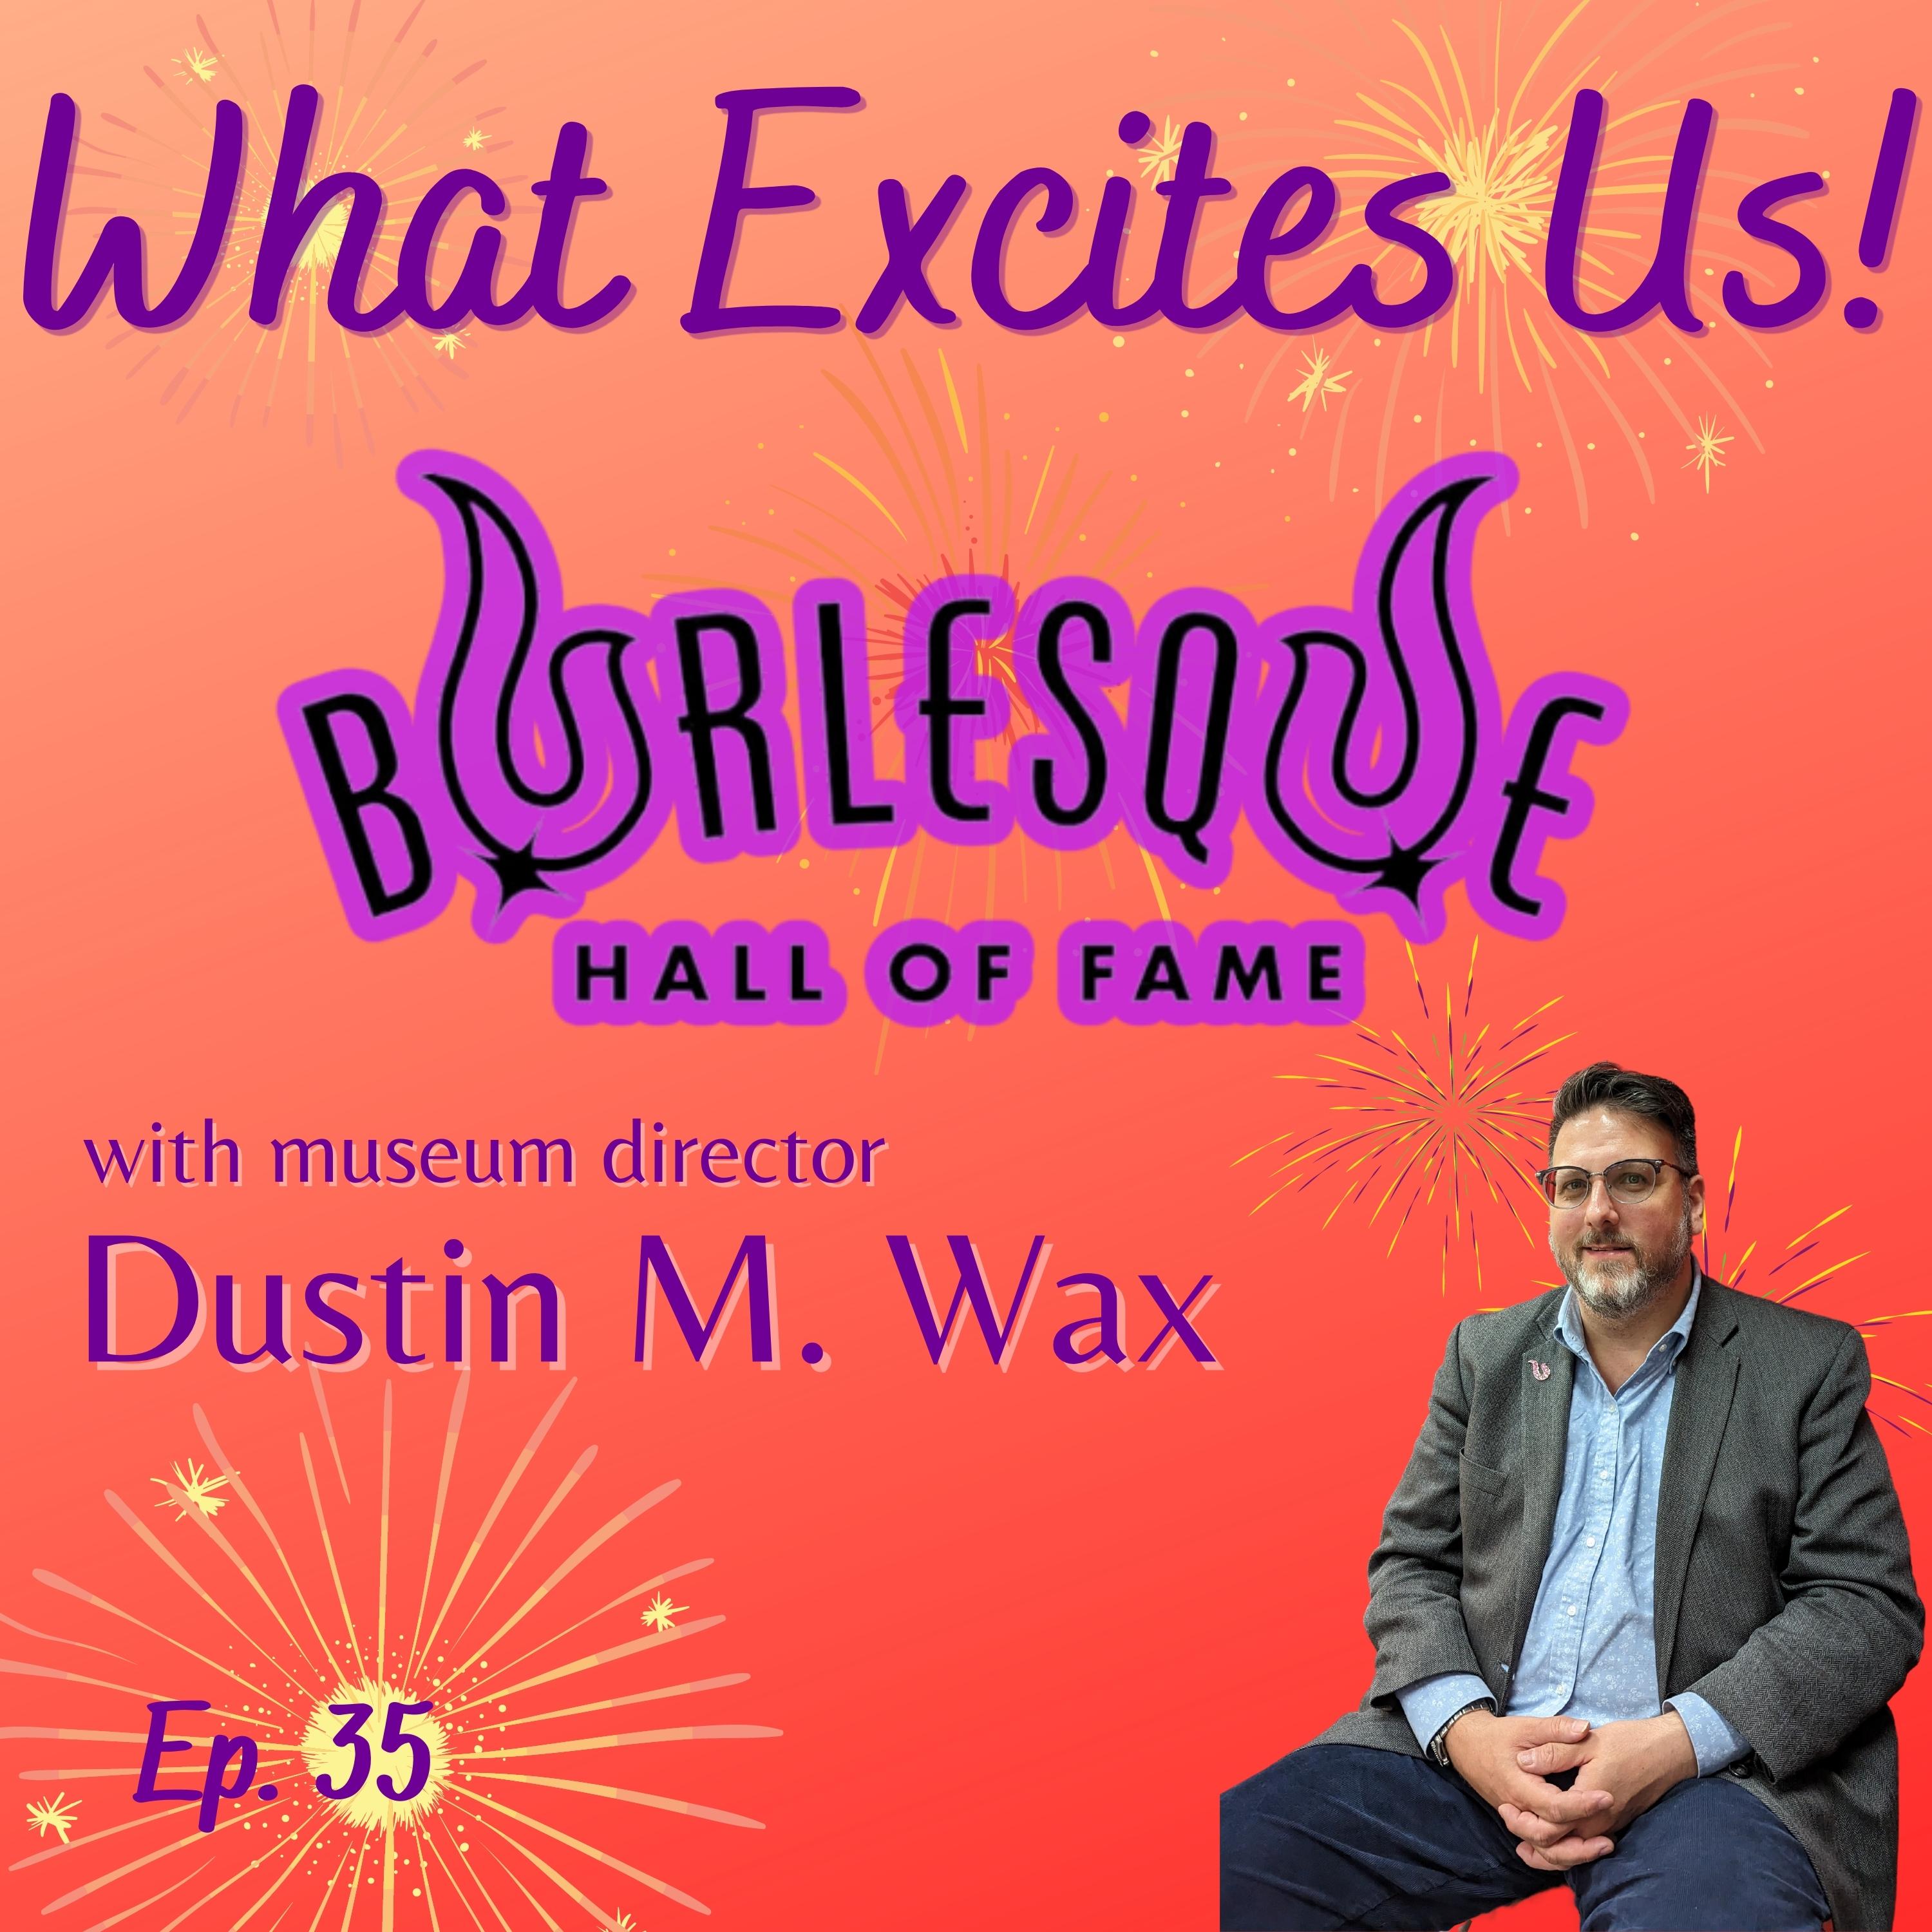  - The Burlesque Hall of Fame with Museum Director Dustin M. Wax